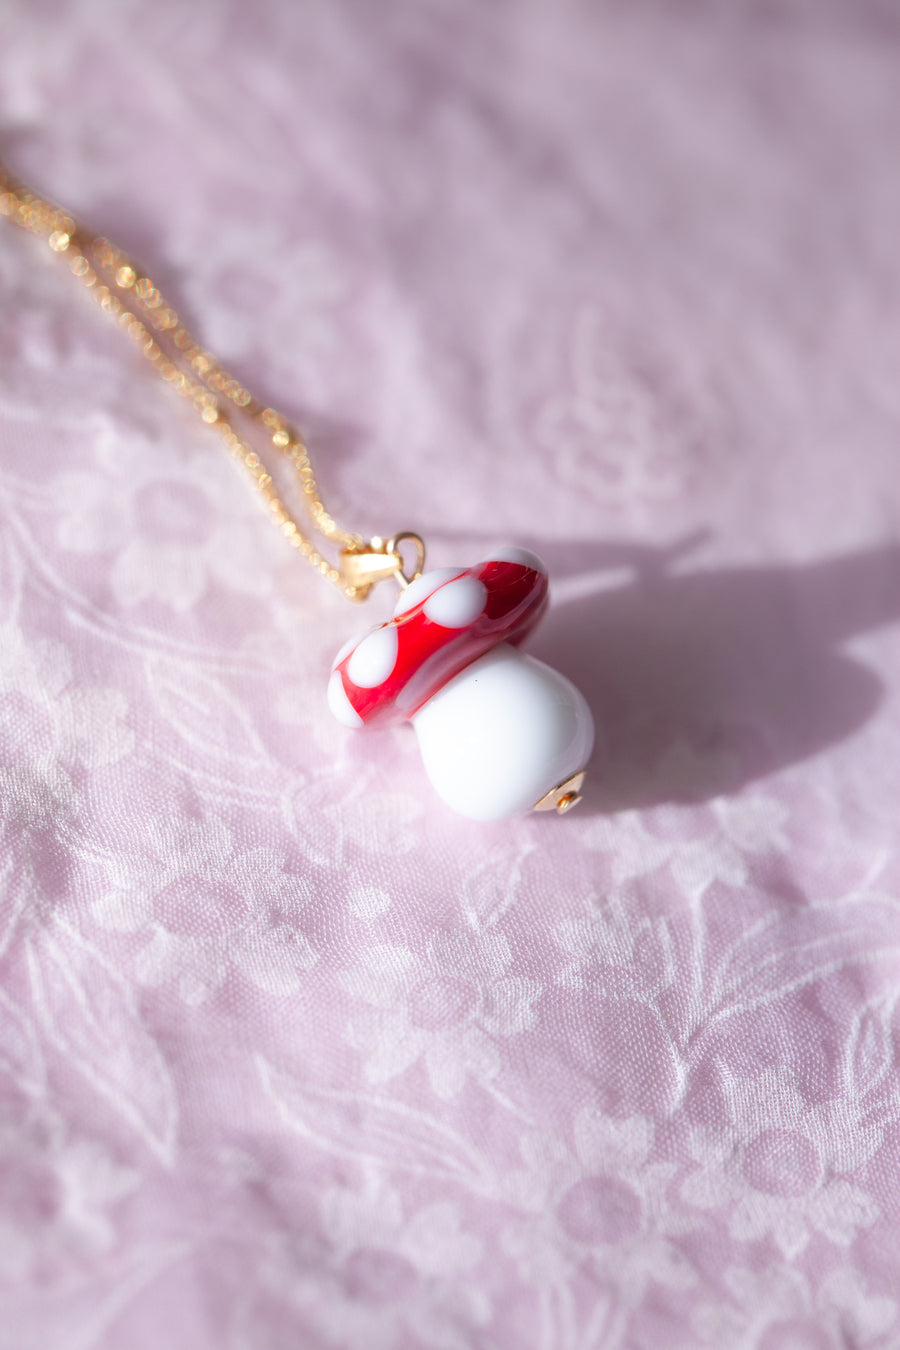 Toadstool Charm Necklace